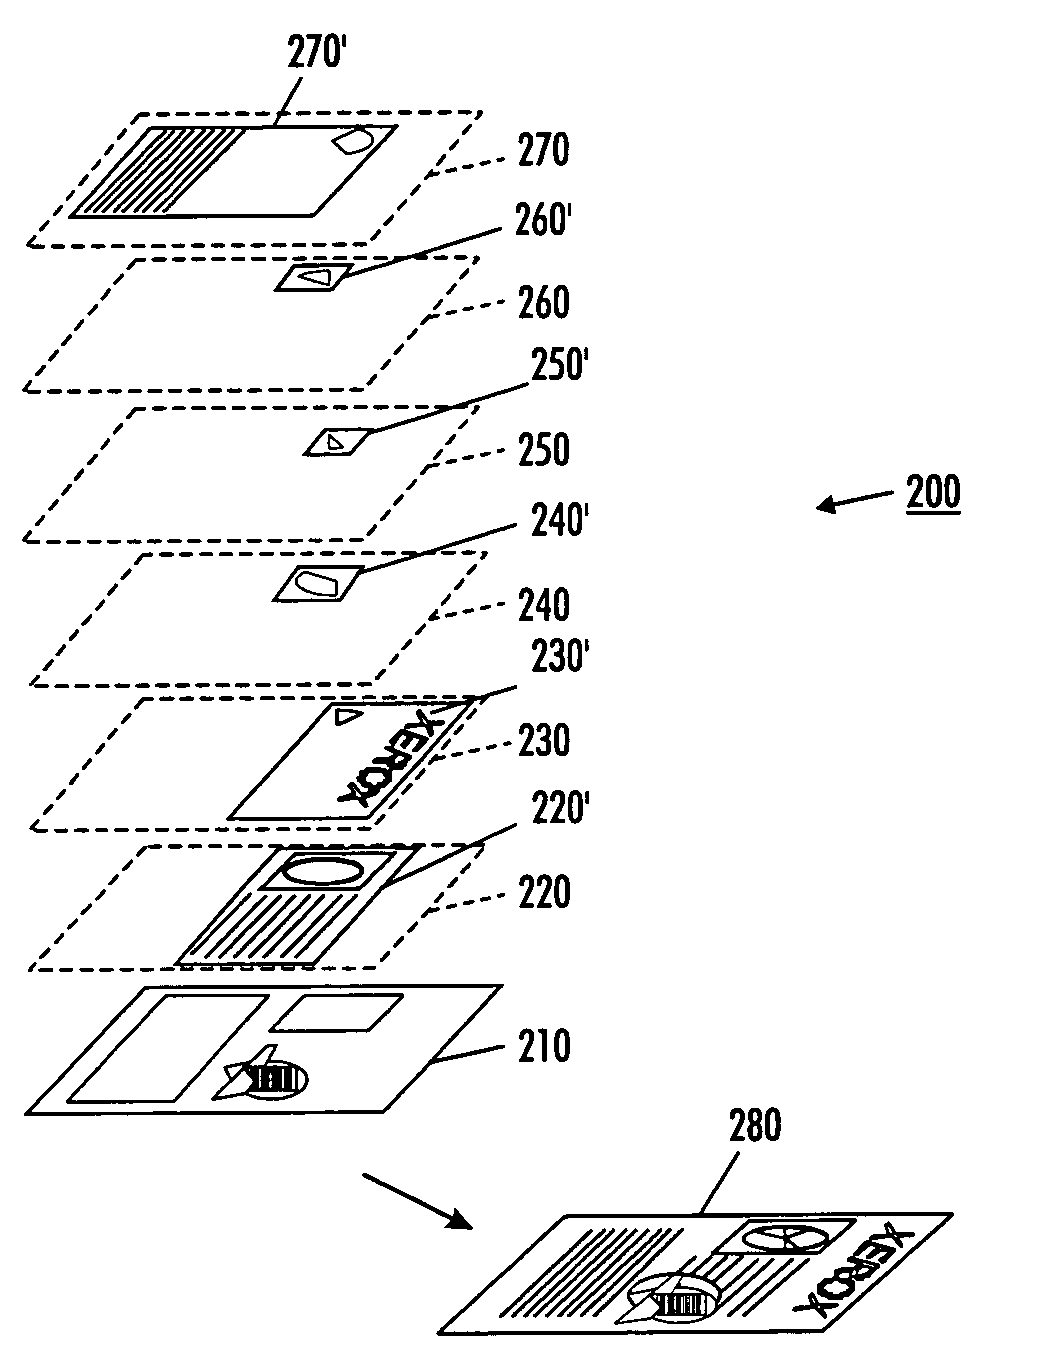 Systems and methods for organizing image data into regions